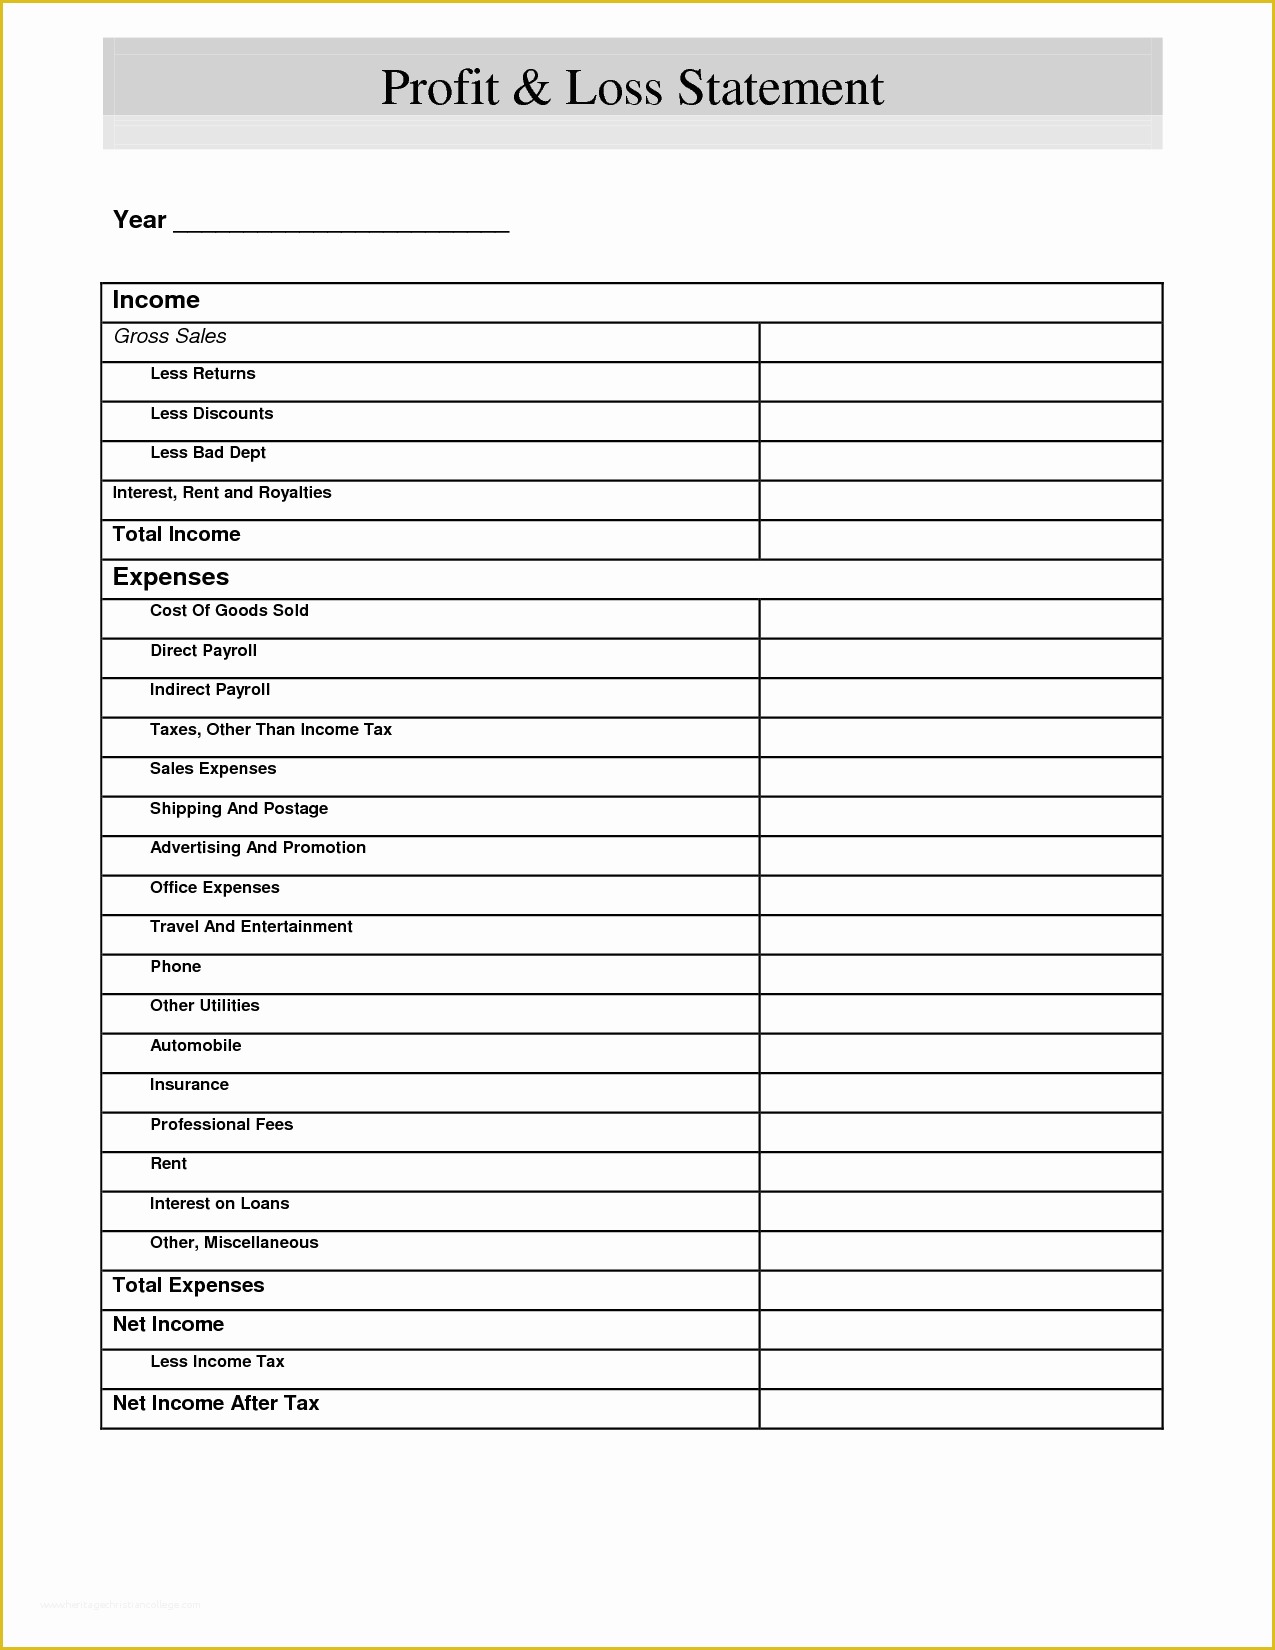 Profit and Loss Statement Excel Template Free Of Profit Loss Statement Template Excel